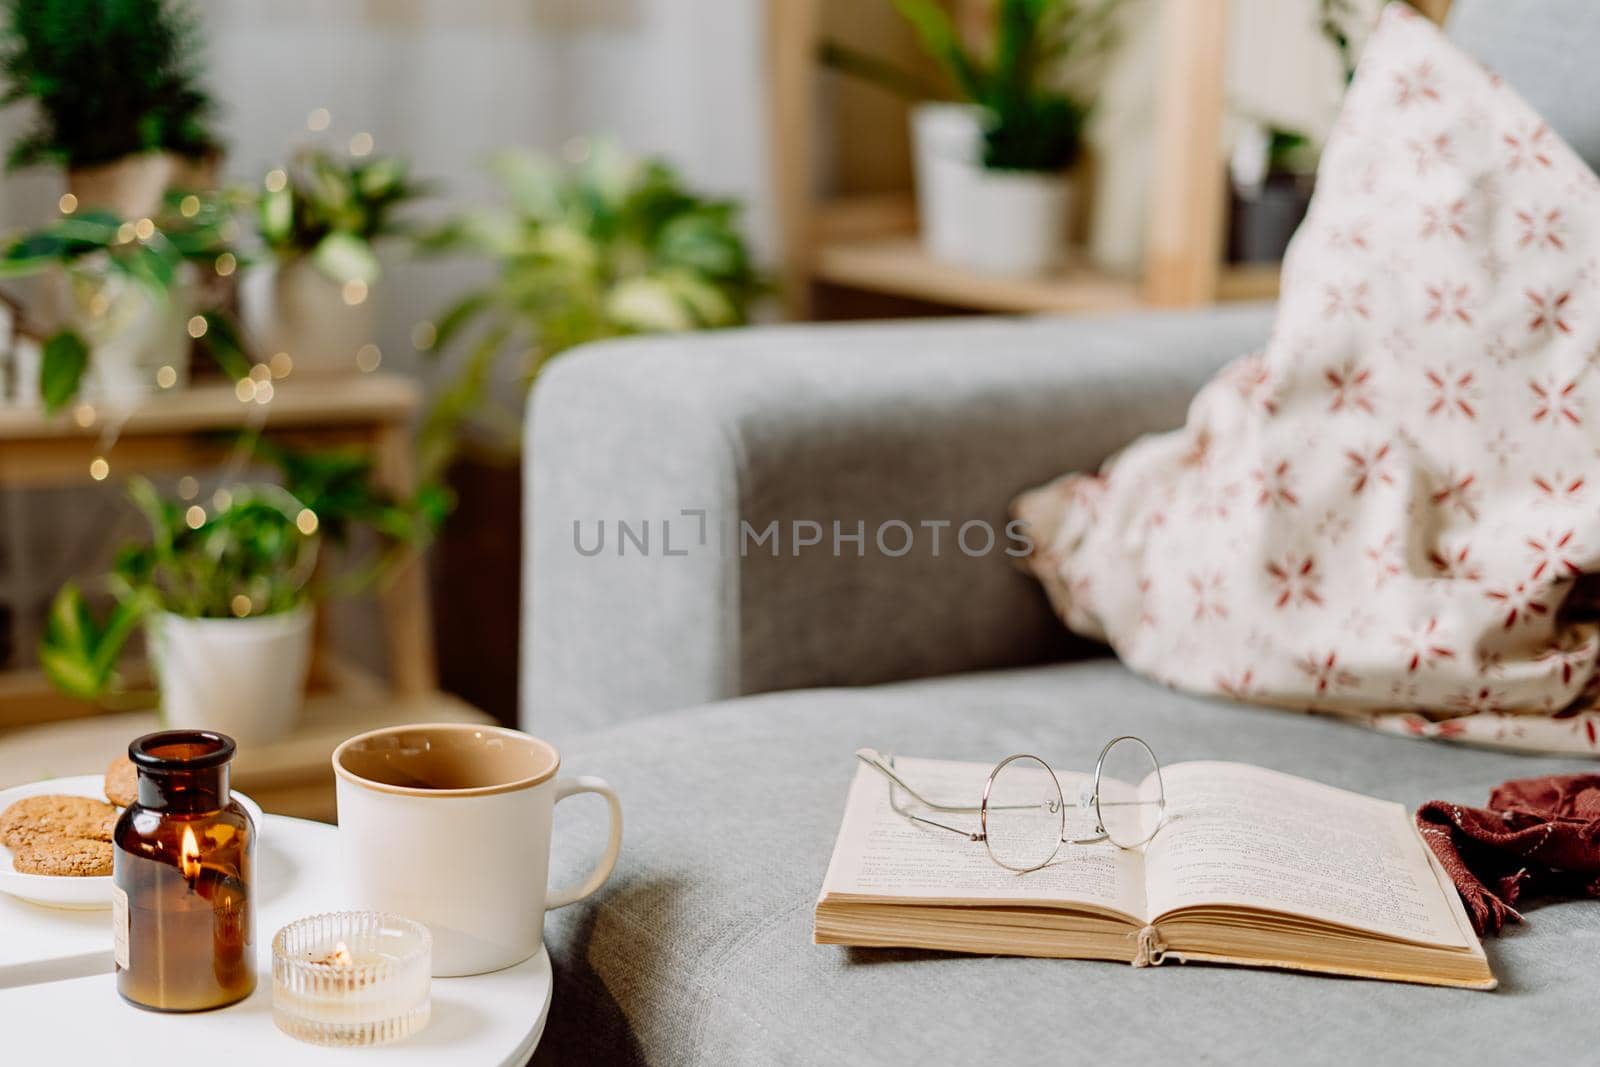 Book on Stylish Christmas room interior with indoor plants, light and decor. Winters holiday with cup of hot coca or coffee, cookies, book and candles. Autumn Cozy home with plaid